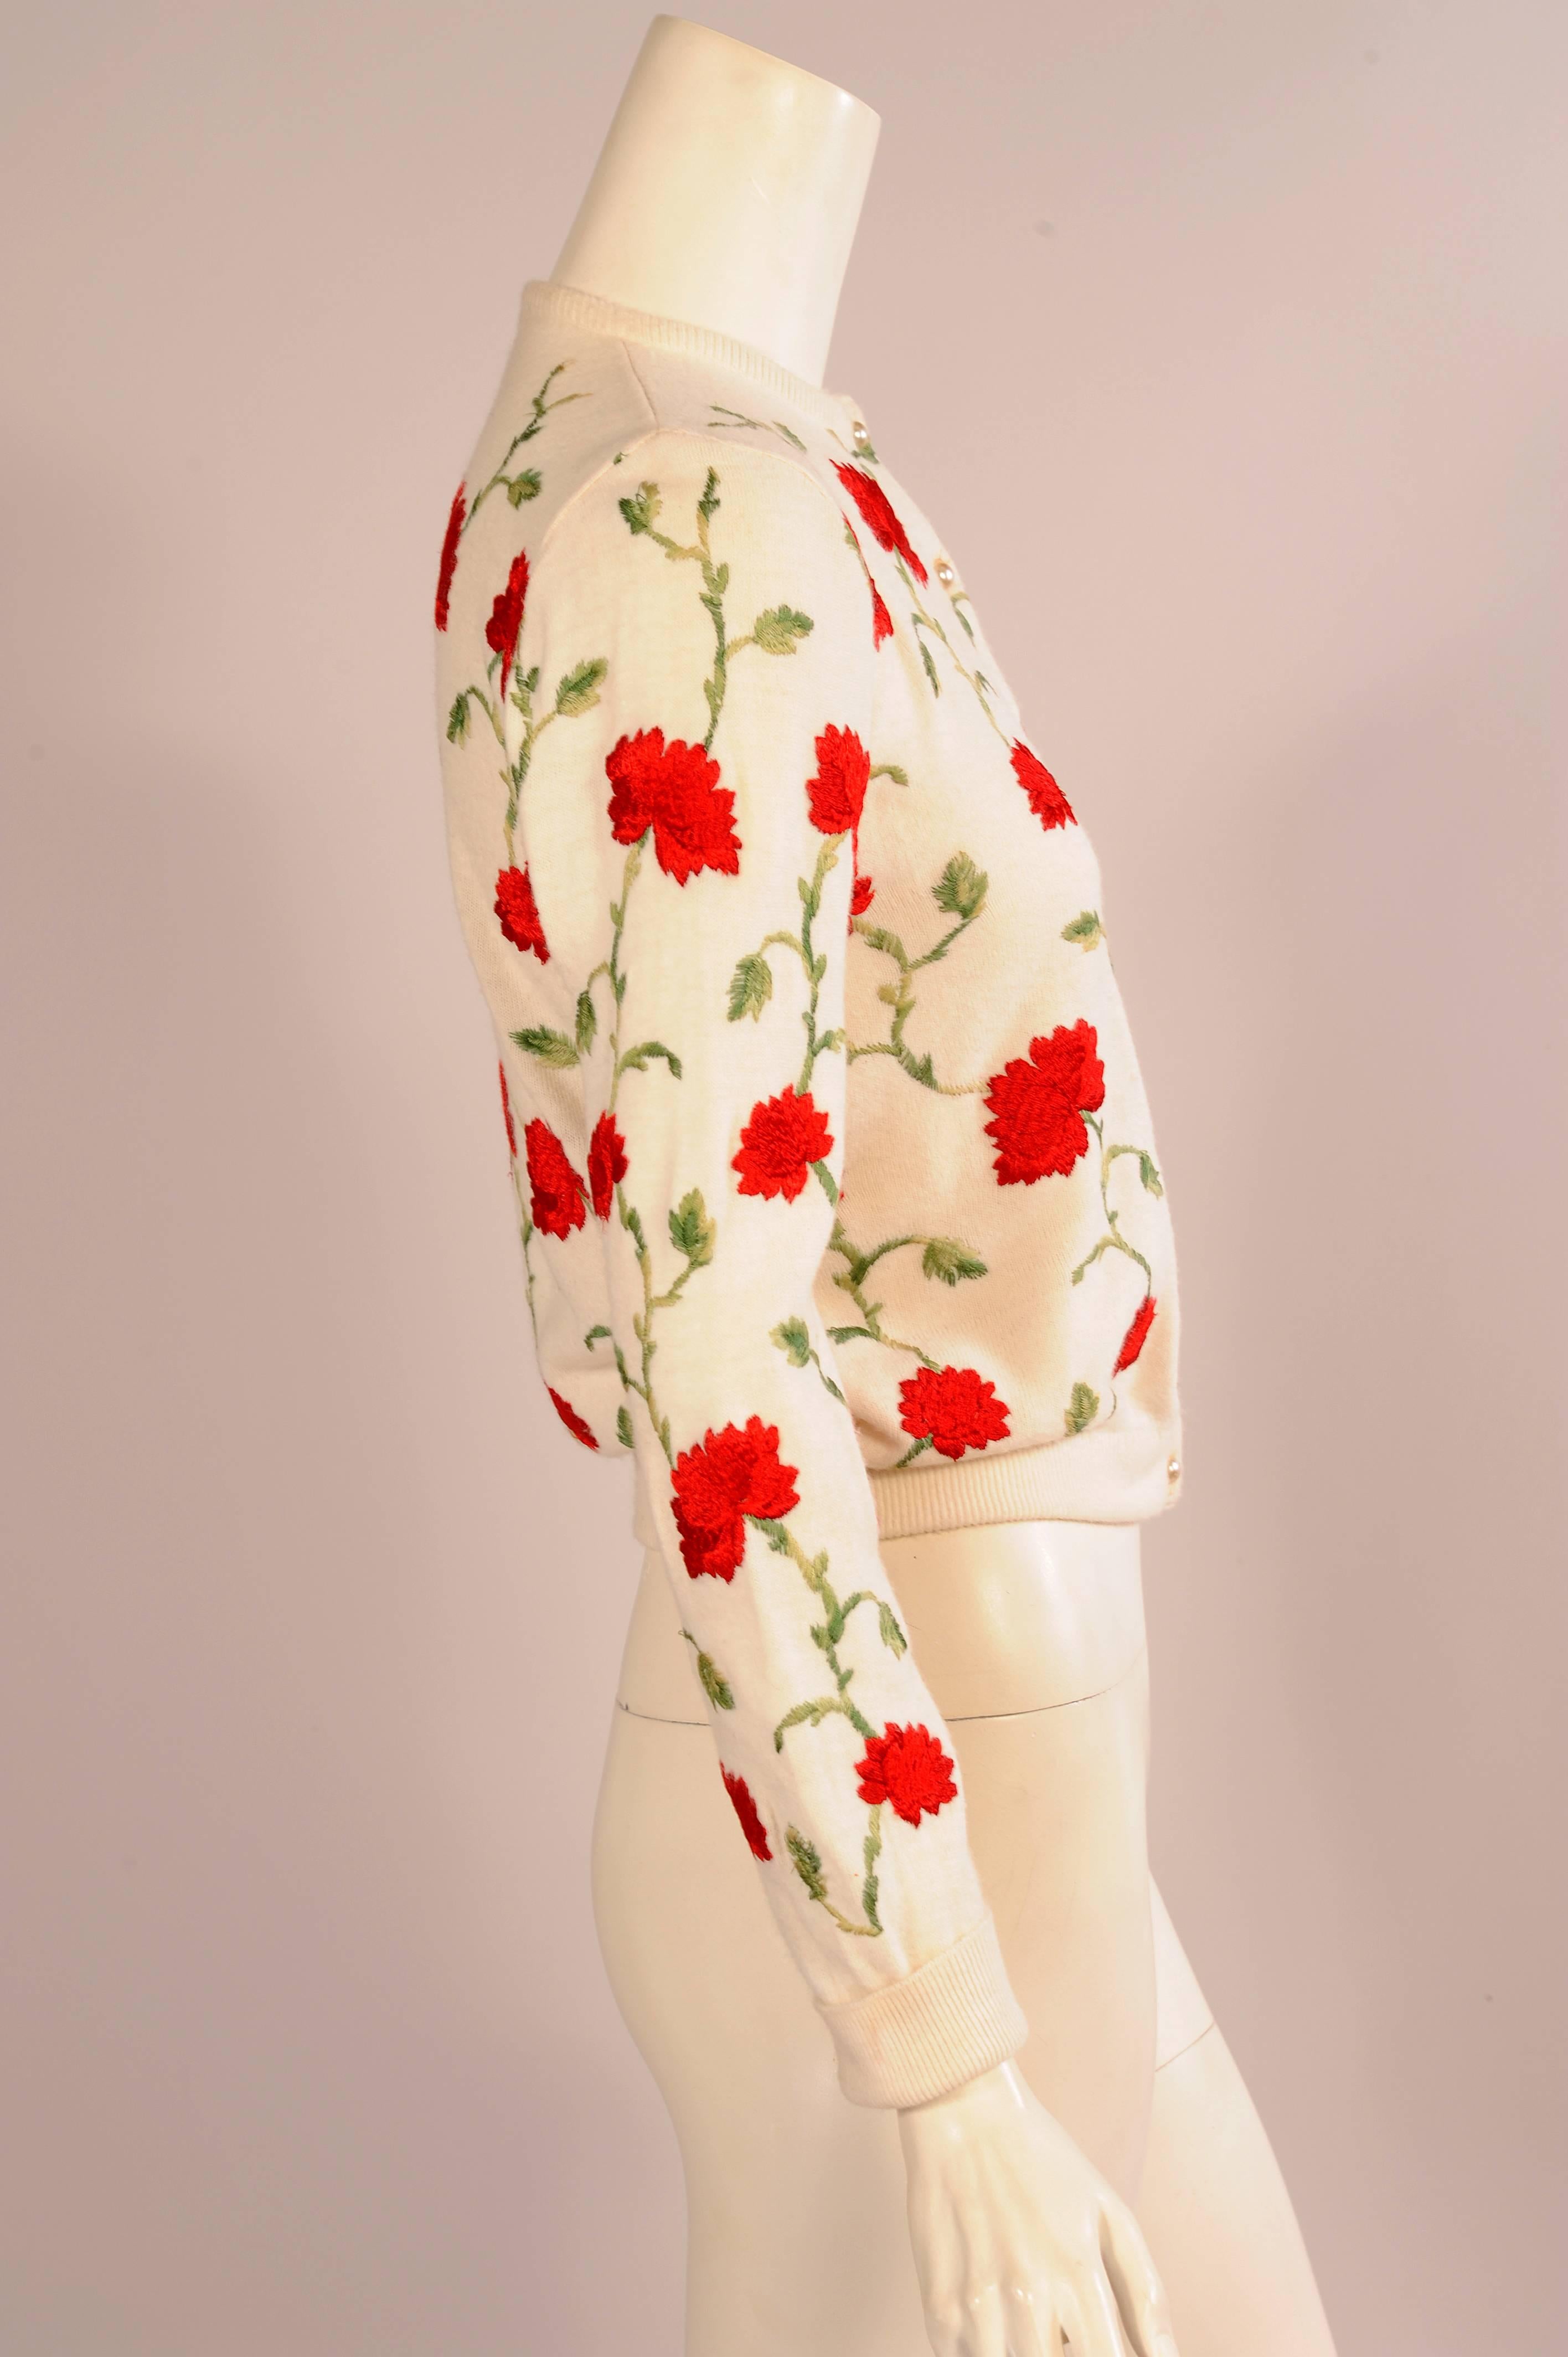 This creamy white cardigan is embroidered with green vines and leaves and cheerful red flowers. There are eight pearl buttons, and the waistband has been hemmed for a more flattering fit. It is in excellent condition.
Measurements;
Shoulders